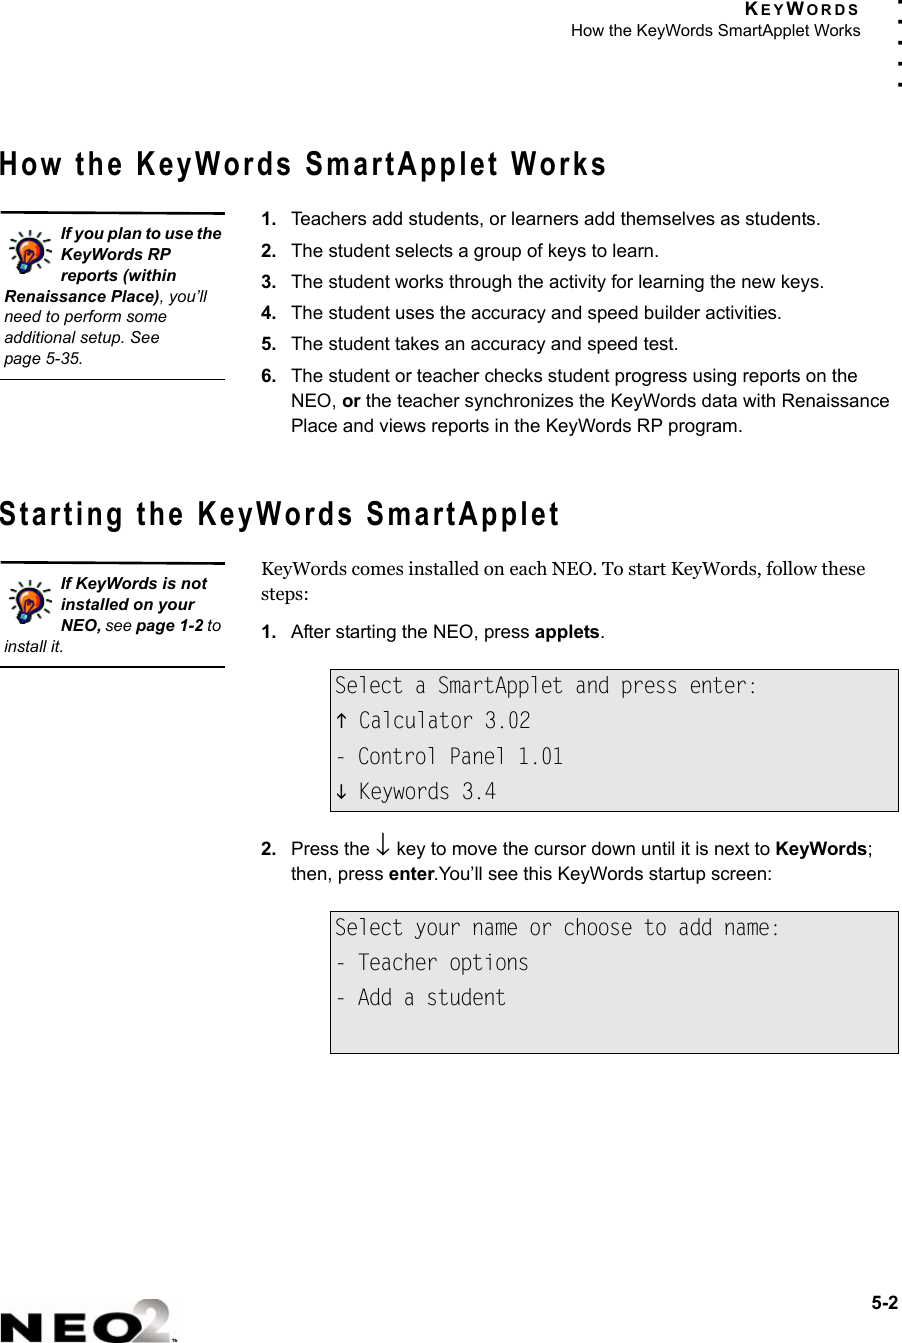 KEYWORDSHow the KeyWords SmartApplet Works5-2. . . . .How the KeyWords SmartApplet Works1. Teachers add students, or learners add themselves as students.2. The student selects a group of keys to learn.3. The student works through the activity for learning the new keys.4. The student uses the accuracy and speed builder activities.5. The student takes an accuracy and speed test.6. The student or teacher checks student progress using reports on the NEO, or the teacher synchronizes the KeyWords data with Renaissance Place and views reports in the KeyWords RP program.Starting the KeyWords SmartAppletKeyWords comes installed on each NEO. To start KeyWords, follow these steps:1. After starting the NEO, press applets.2. Press the ↓ key to move the cursor down until it is next to KeyWords; then, press enter.You’ll see this KeyWords startup screen:Select a SmartApplet and press enter:K Calculator 3.02- Control Panel 1.01L Keywords 3.4Select your name or choose to add name:- Teacher options- Add a studentIf you plan to use the KeyWords RP reports (within Renaissance Place), you’ll need to perform some additional setup. Seepage 5-35.If KeyWords is not installed on your NEO, see page 1-2 to install it.